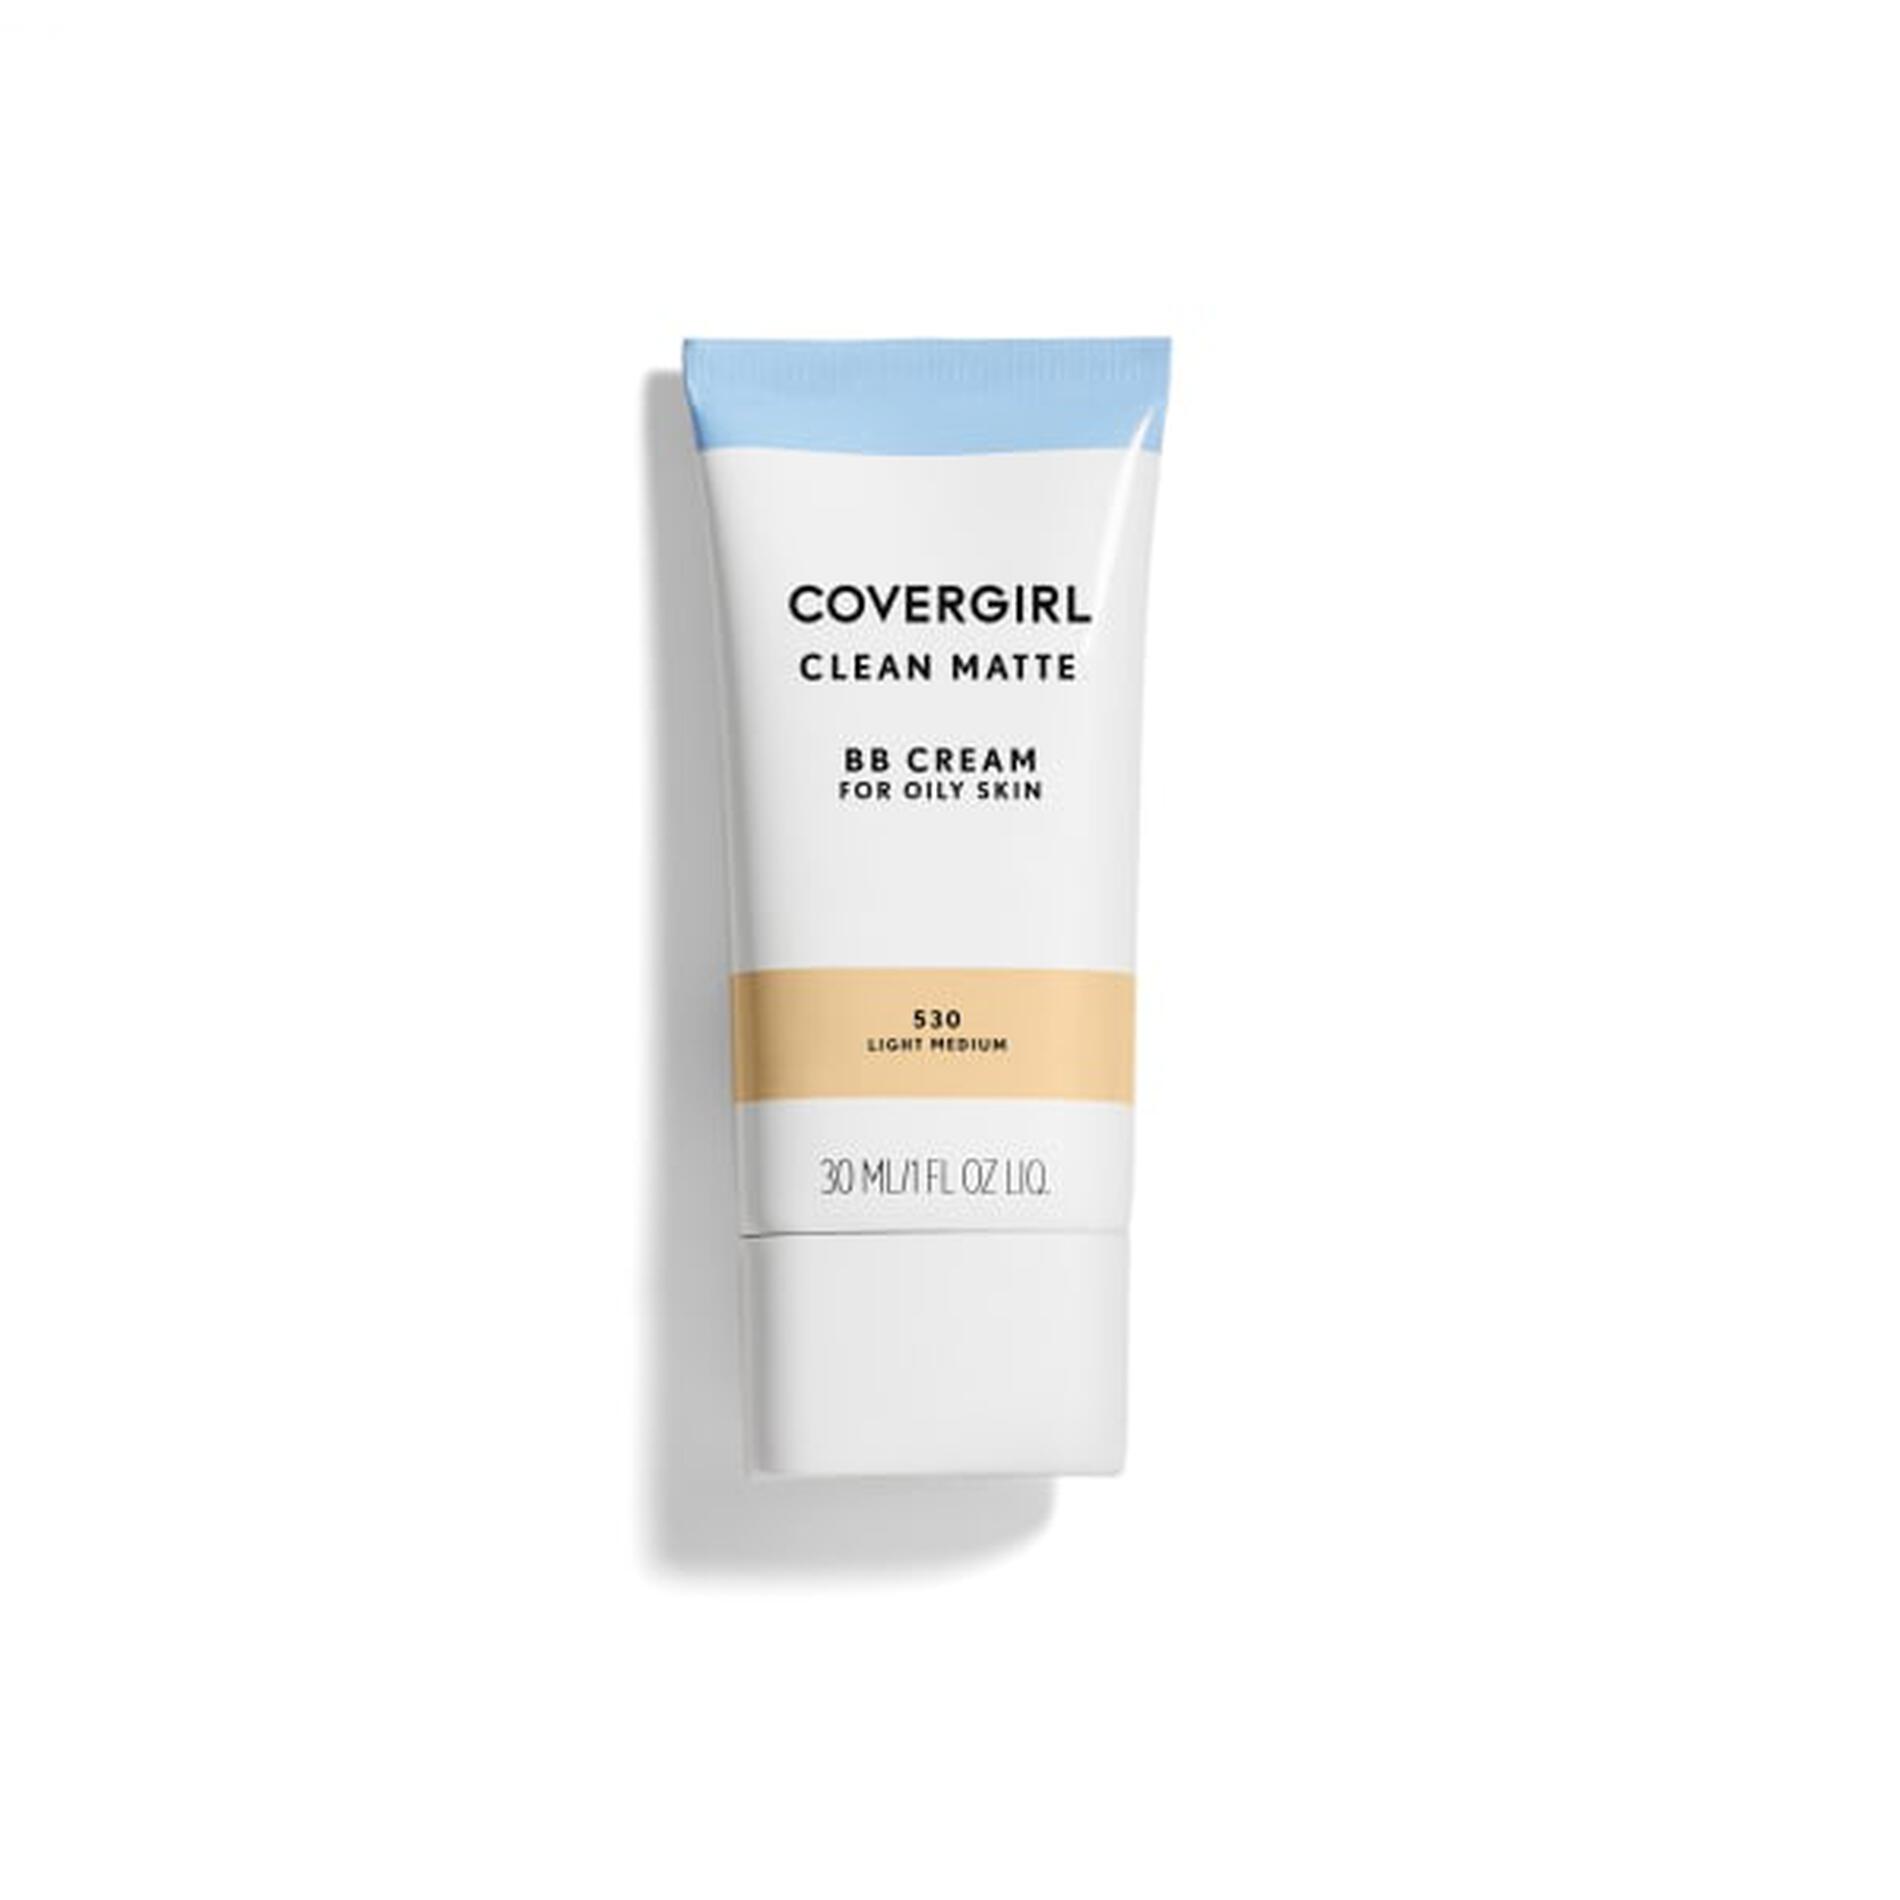 Covergirl Clean Matte BB Cream For Oily Skin